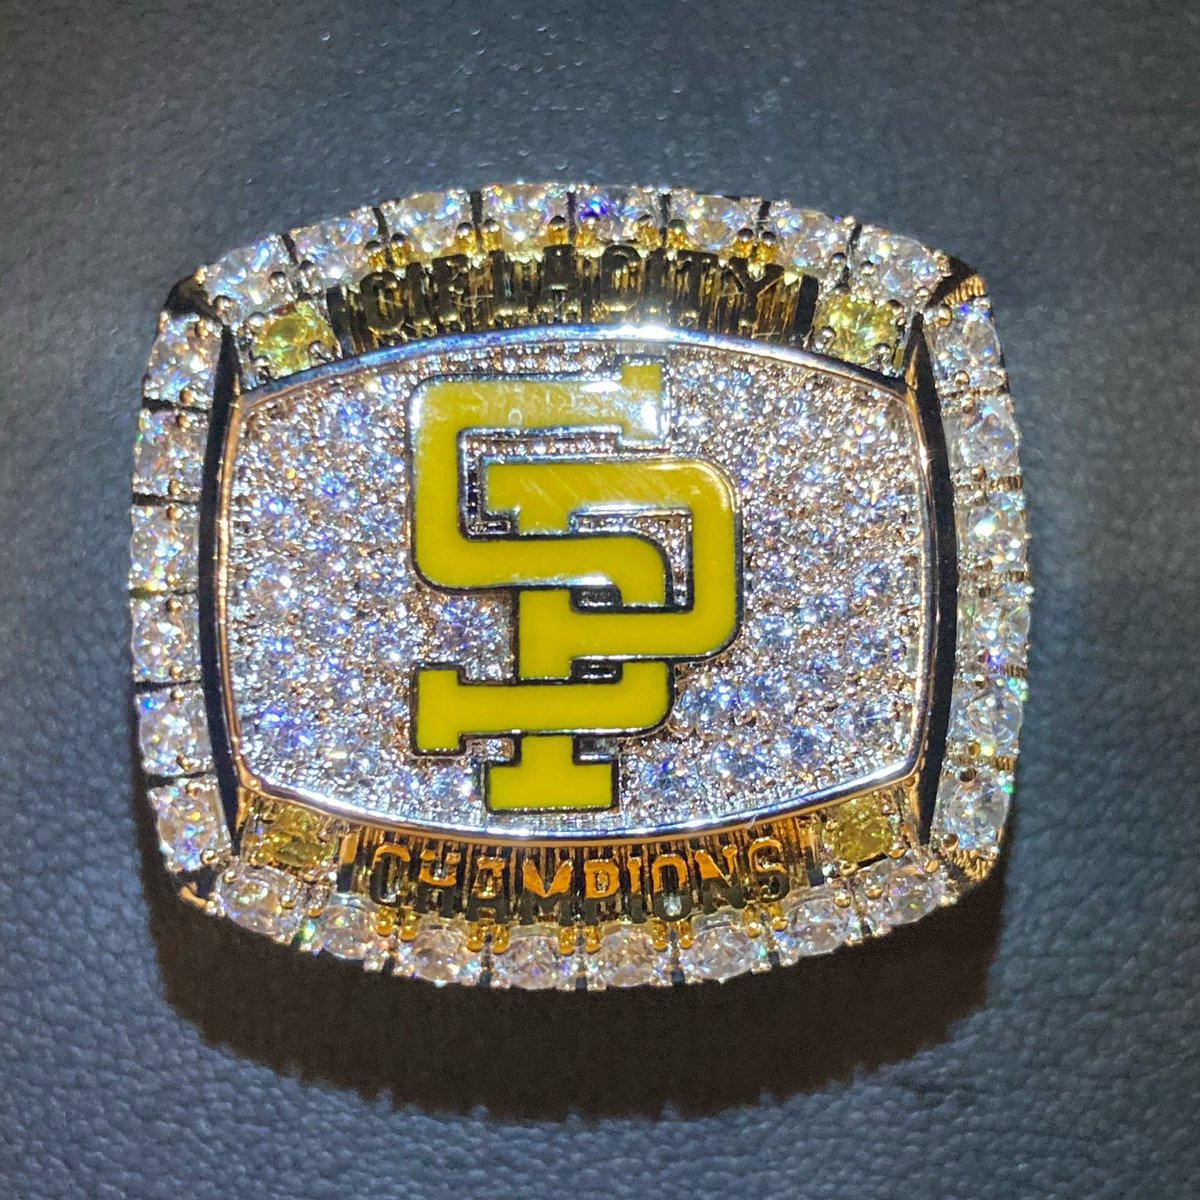 Our 2022 @CIFLACS Division 1 championship rings came in today! A testament to the hard work put in by our girls all year long to become 5-time champions! @BaronRings @latsondheimer @JamaalStreet @breezepreps @SBLiveCA @DamianCalhoun @renelopez19 @CalHiSports